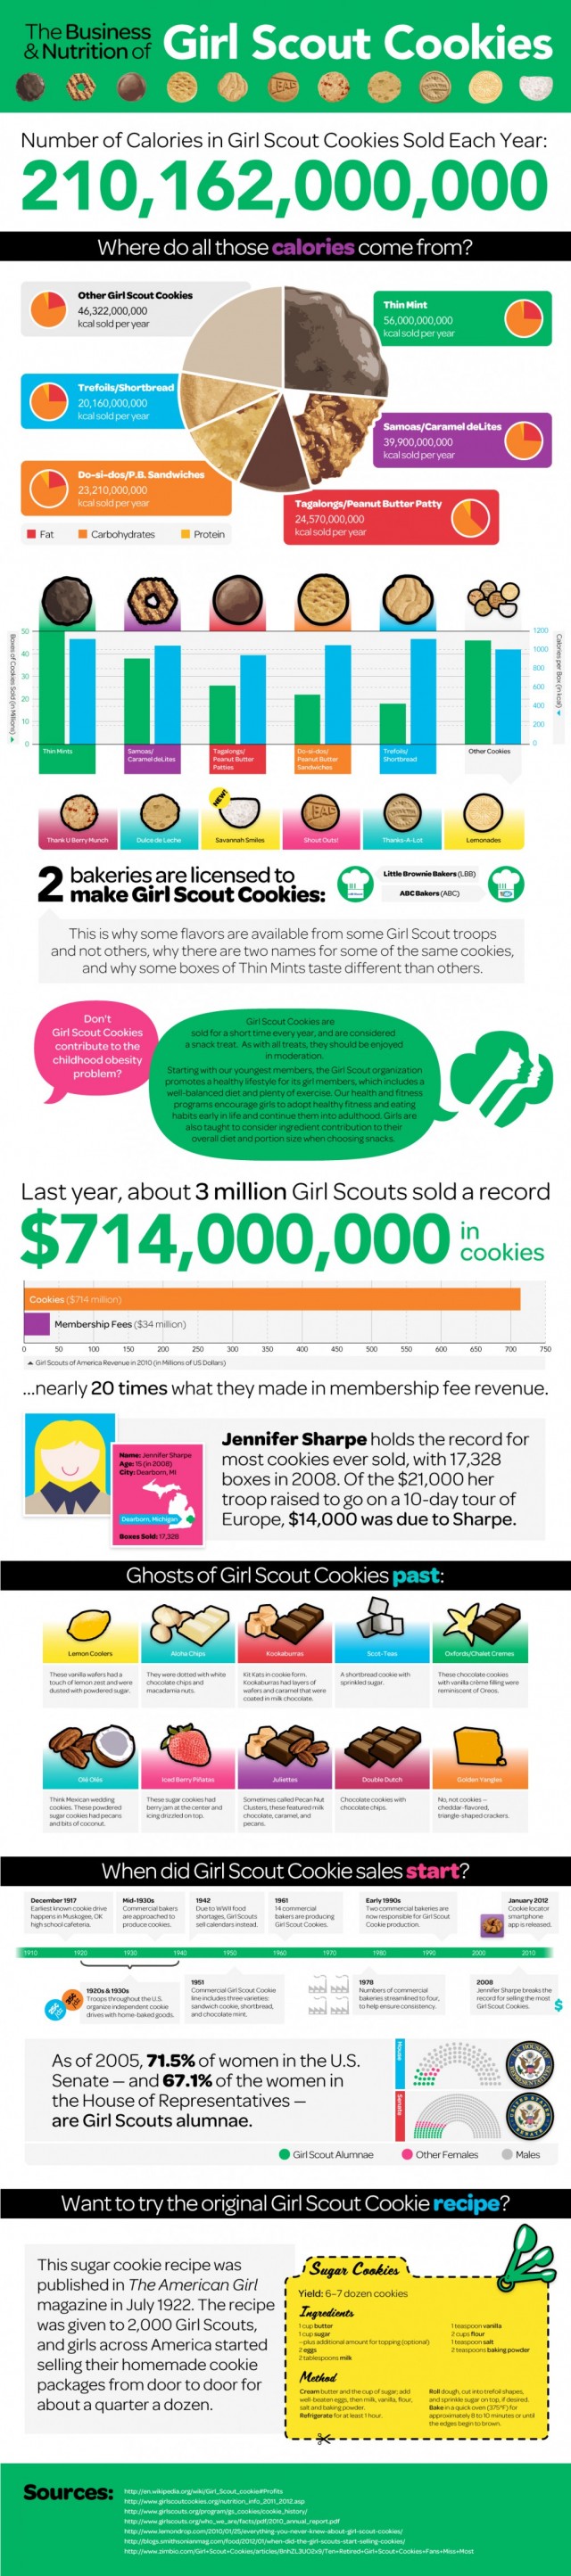 The Business & Nutrition of Girl Scout Cookies